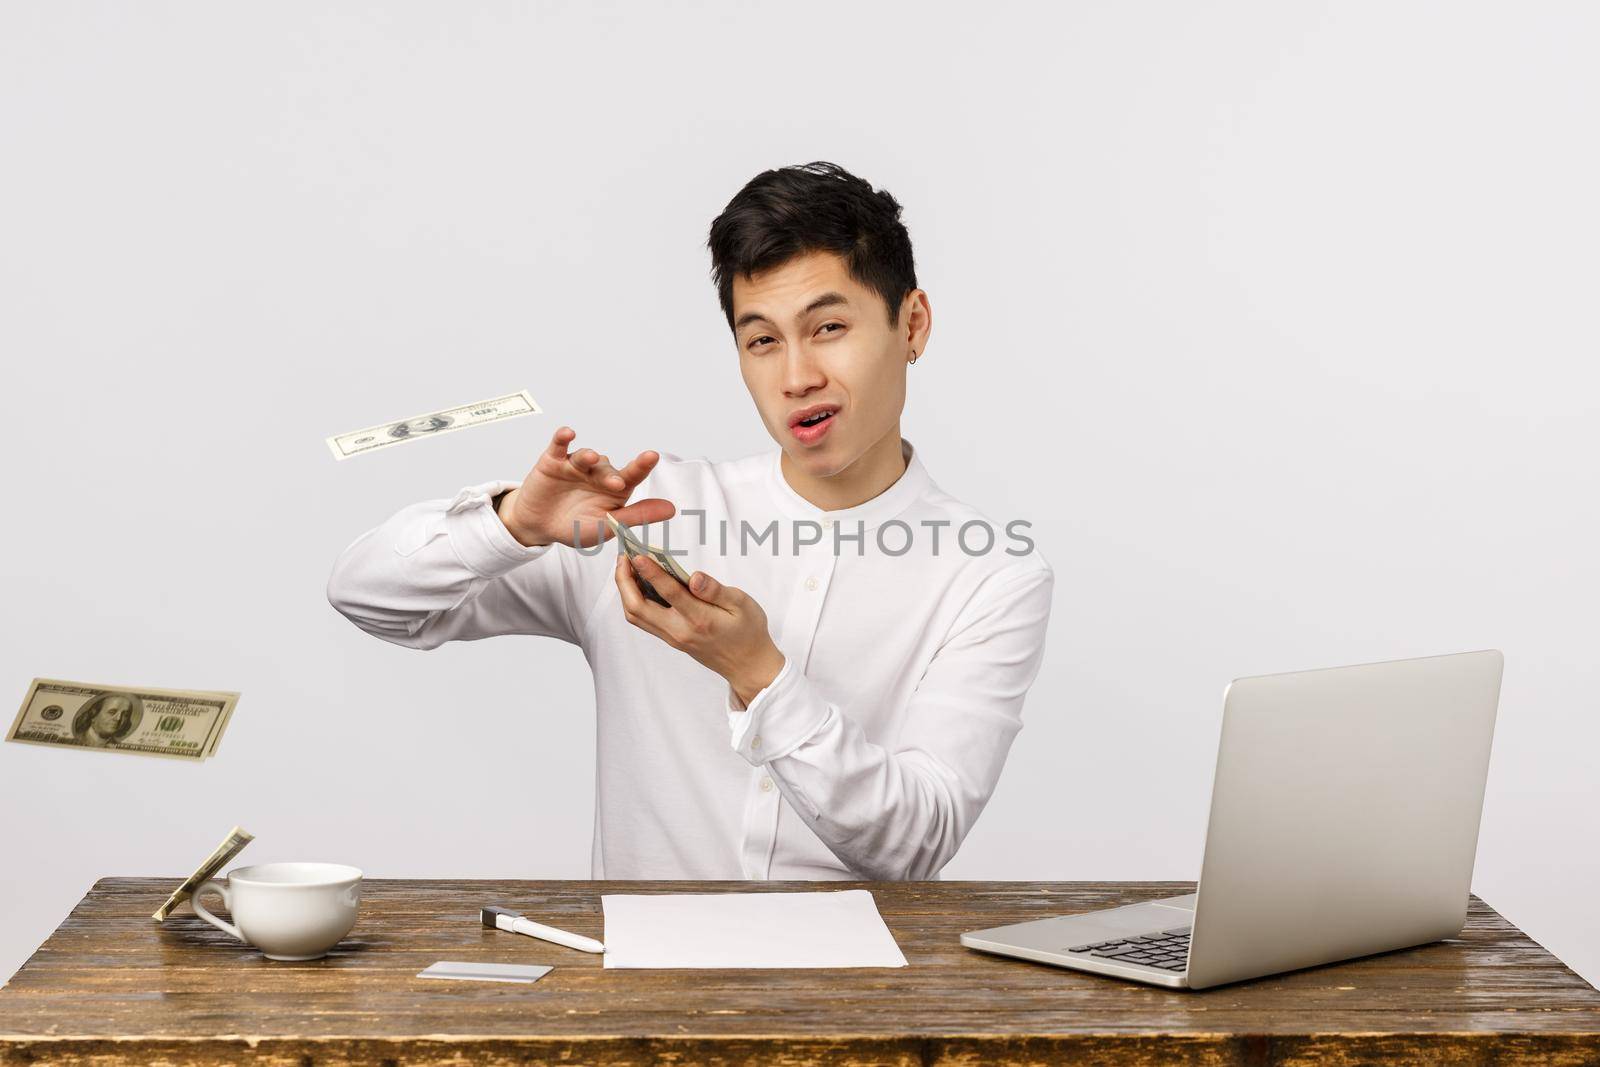 Time to party. Carefree wealthy and successful young chinese male entrepreneur, throwing money at camera with sassy delighted expression, wasting cash, playing with dollars, white background.